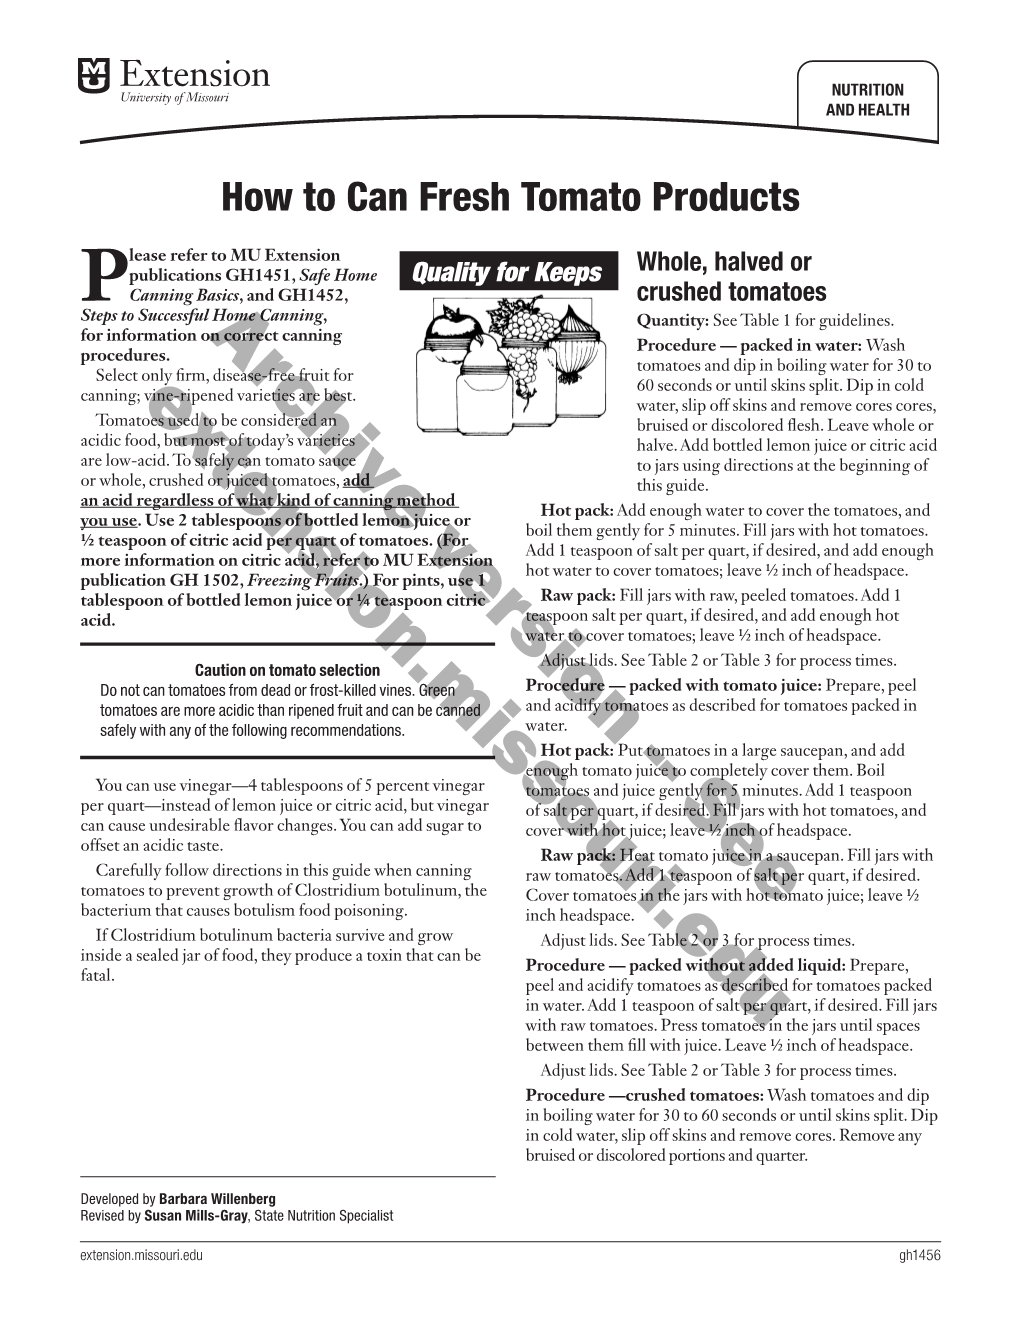 How to Can Fresh Tomato Products